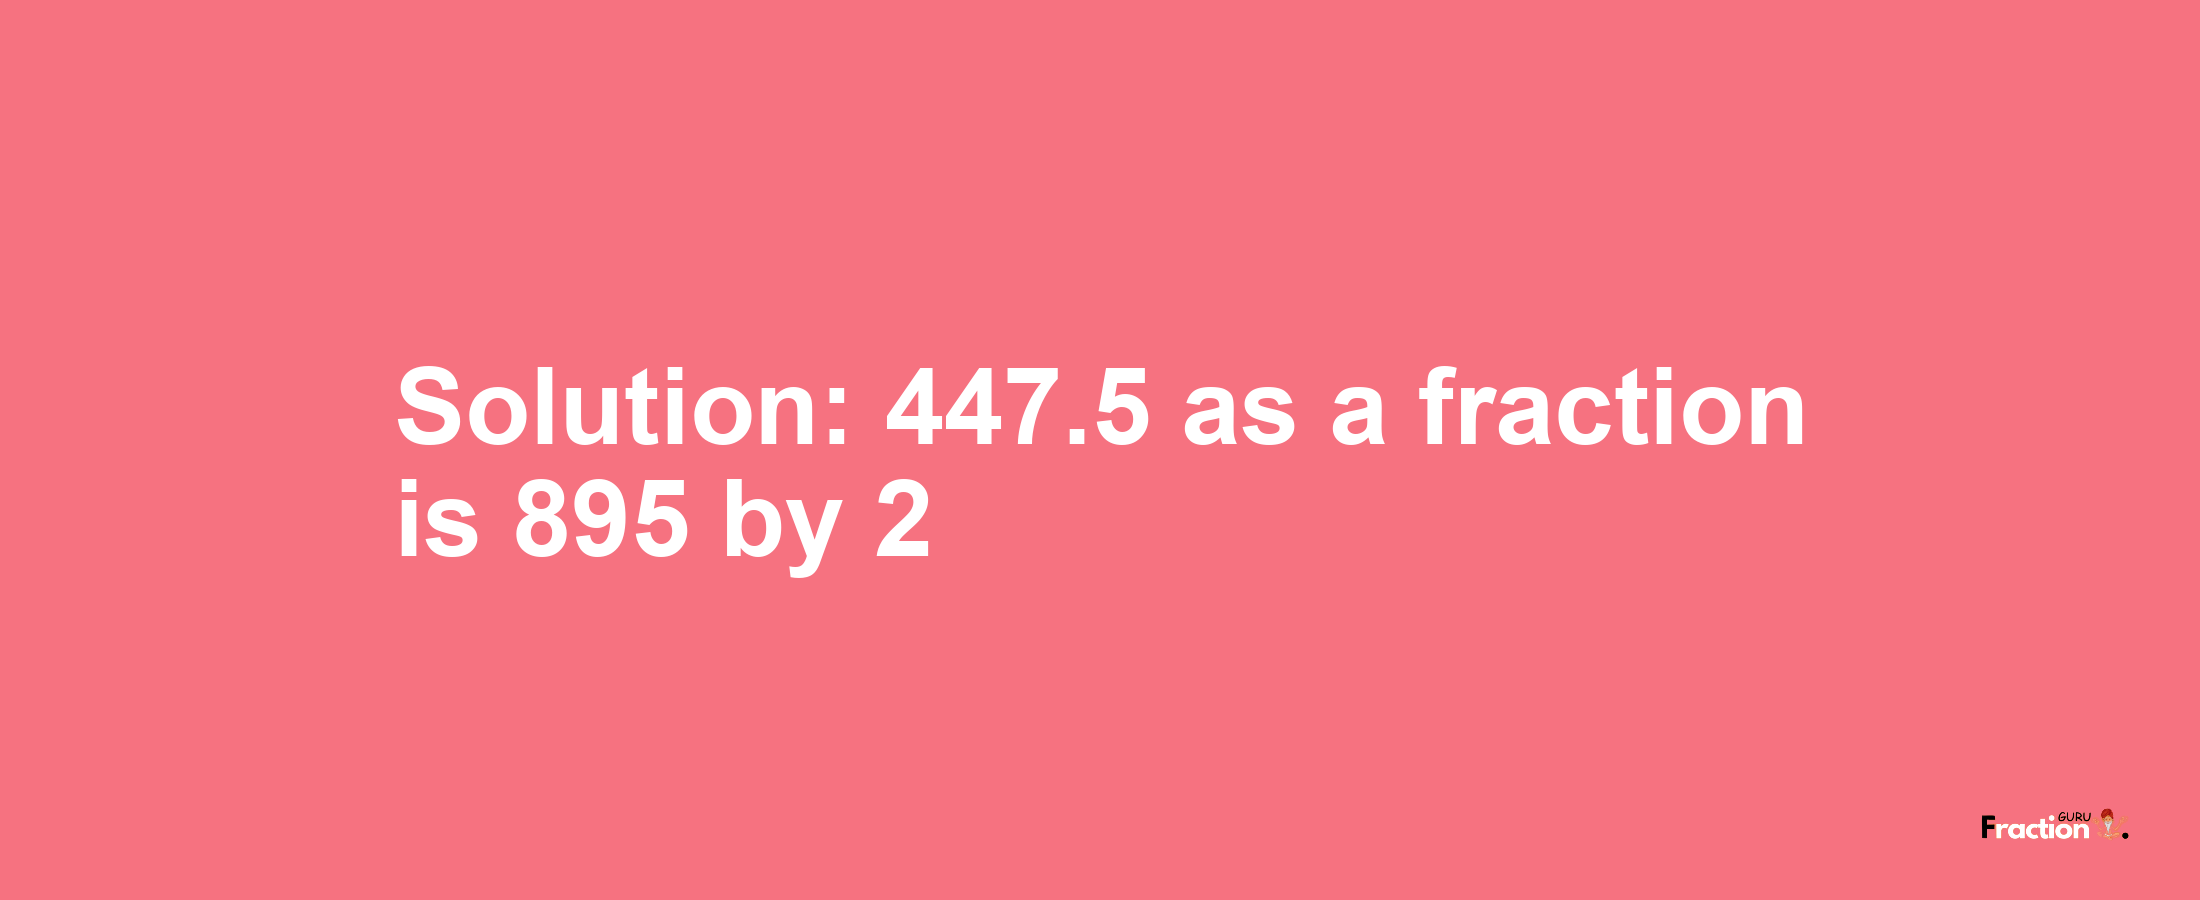 Solution:447.5 as a fraction is 895/2